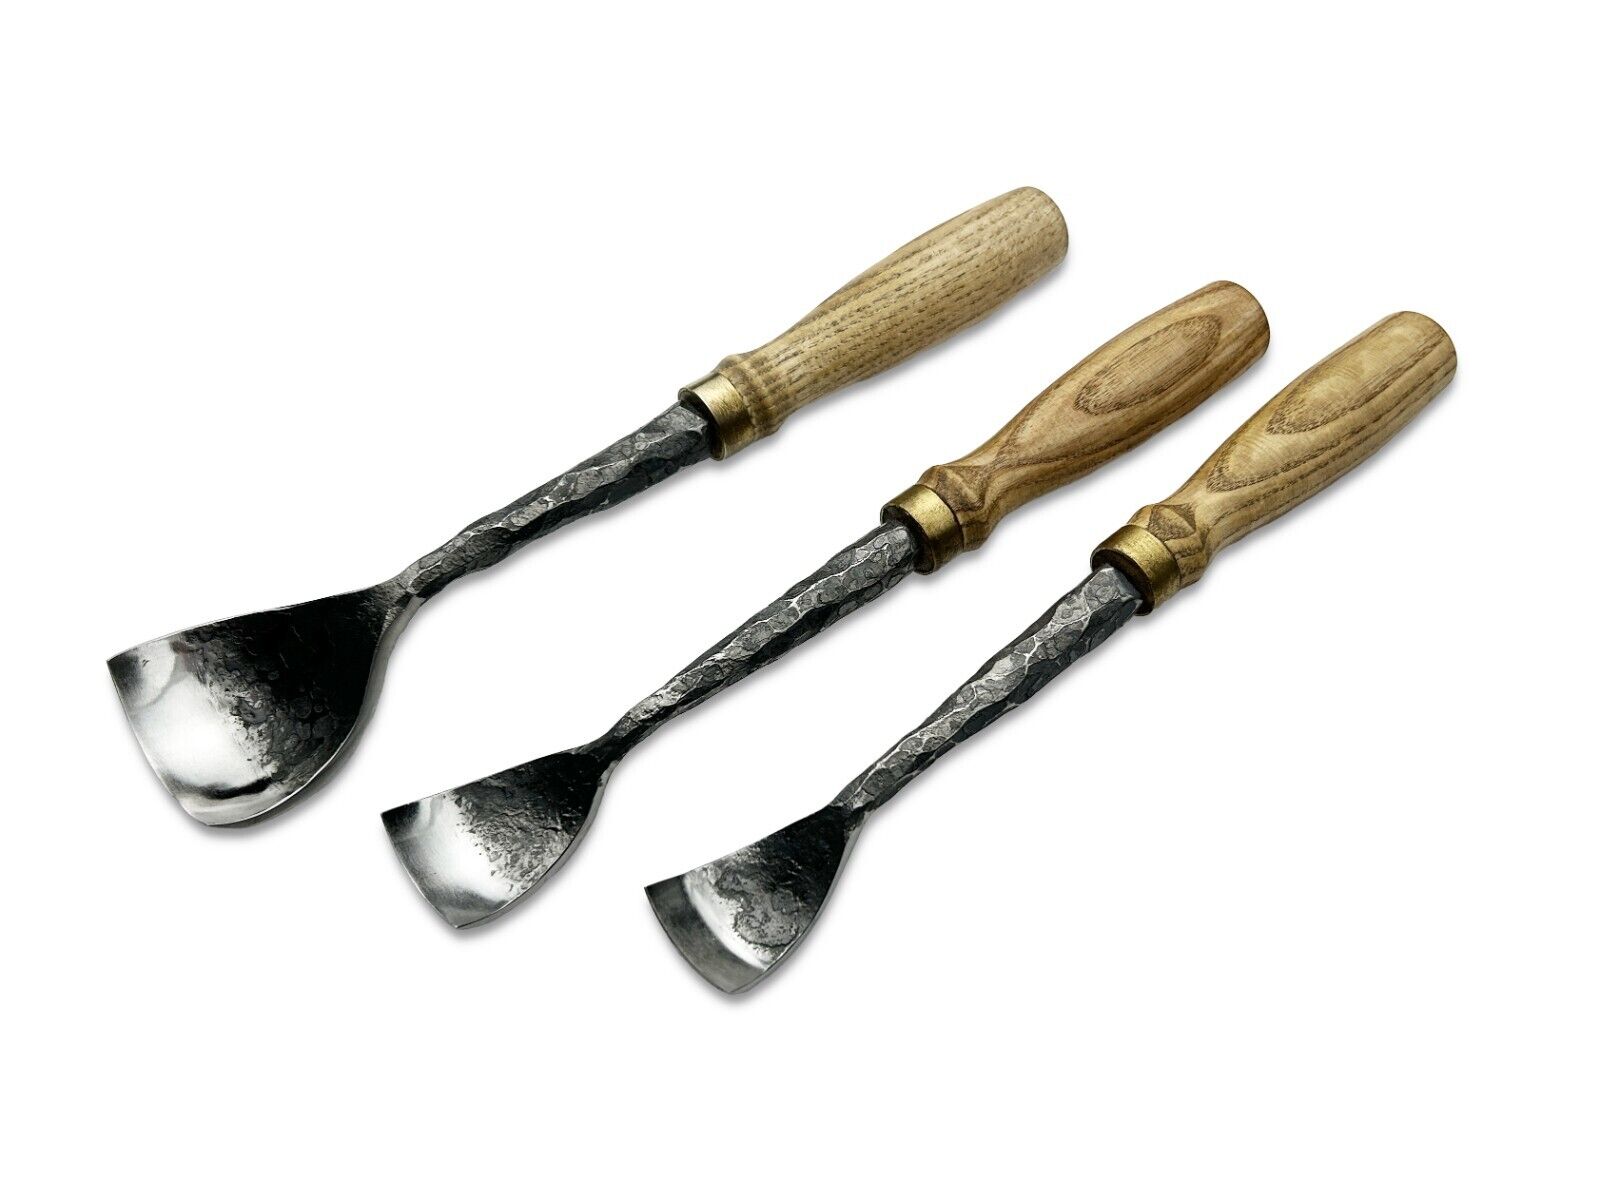 Wood Carving Gouges Set 3 PCS. Spoon Carving Tool. Woodworking chisel. Handmade